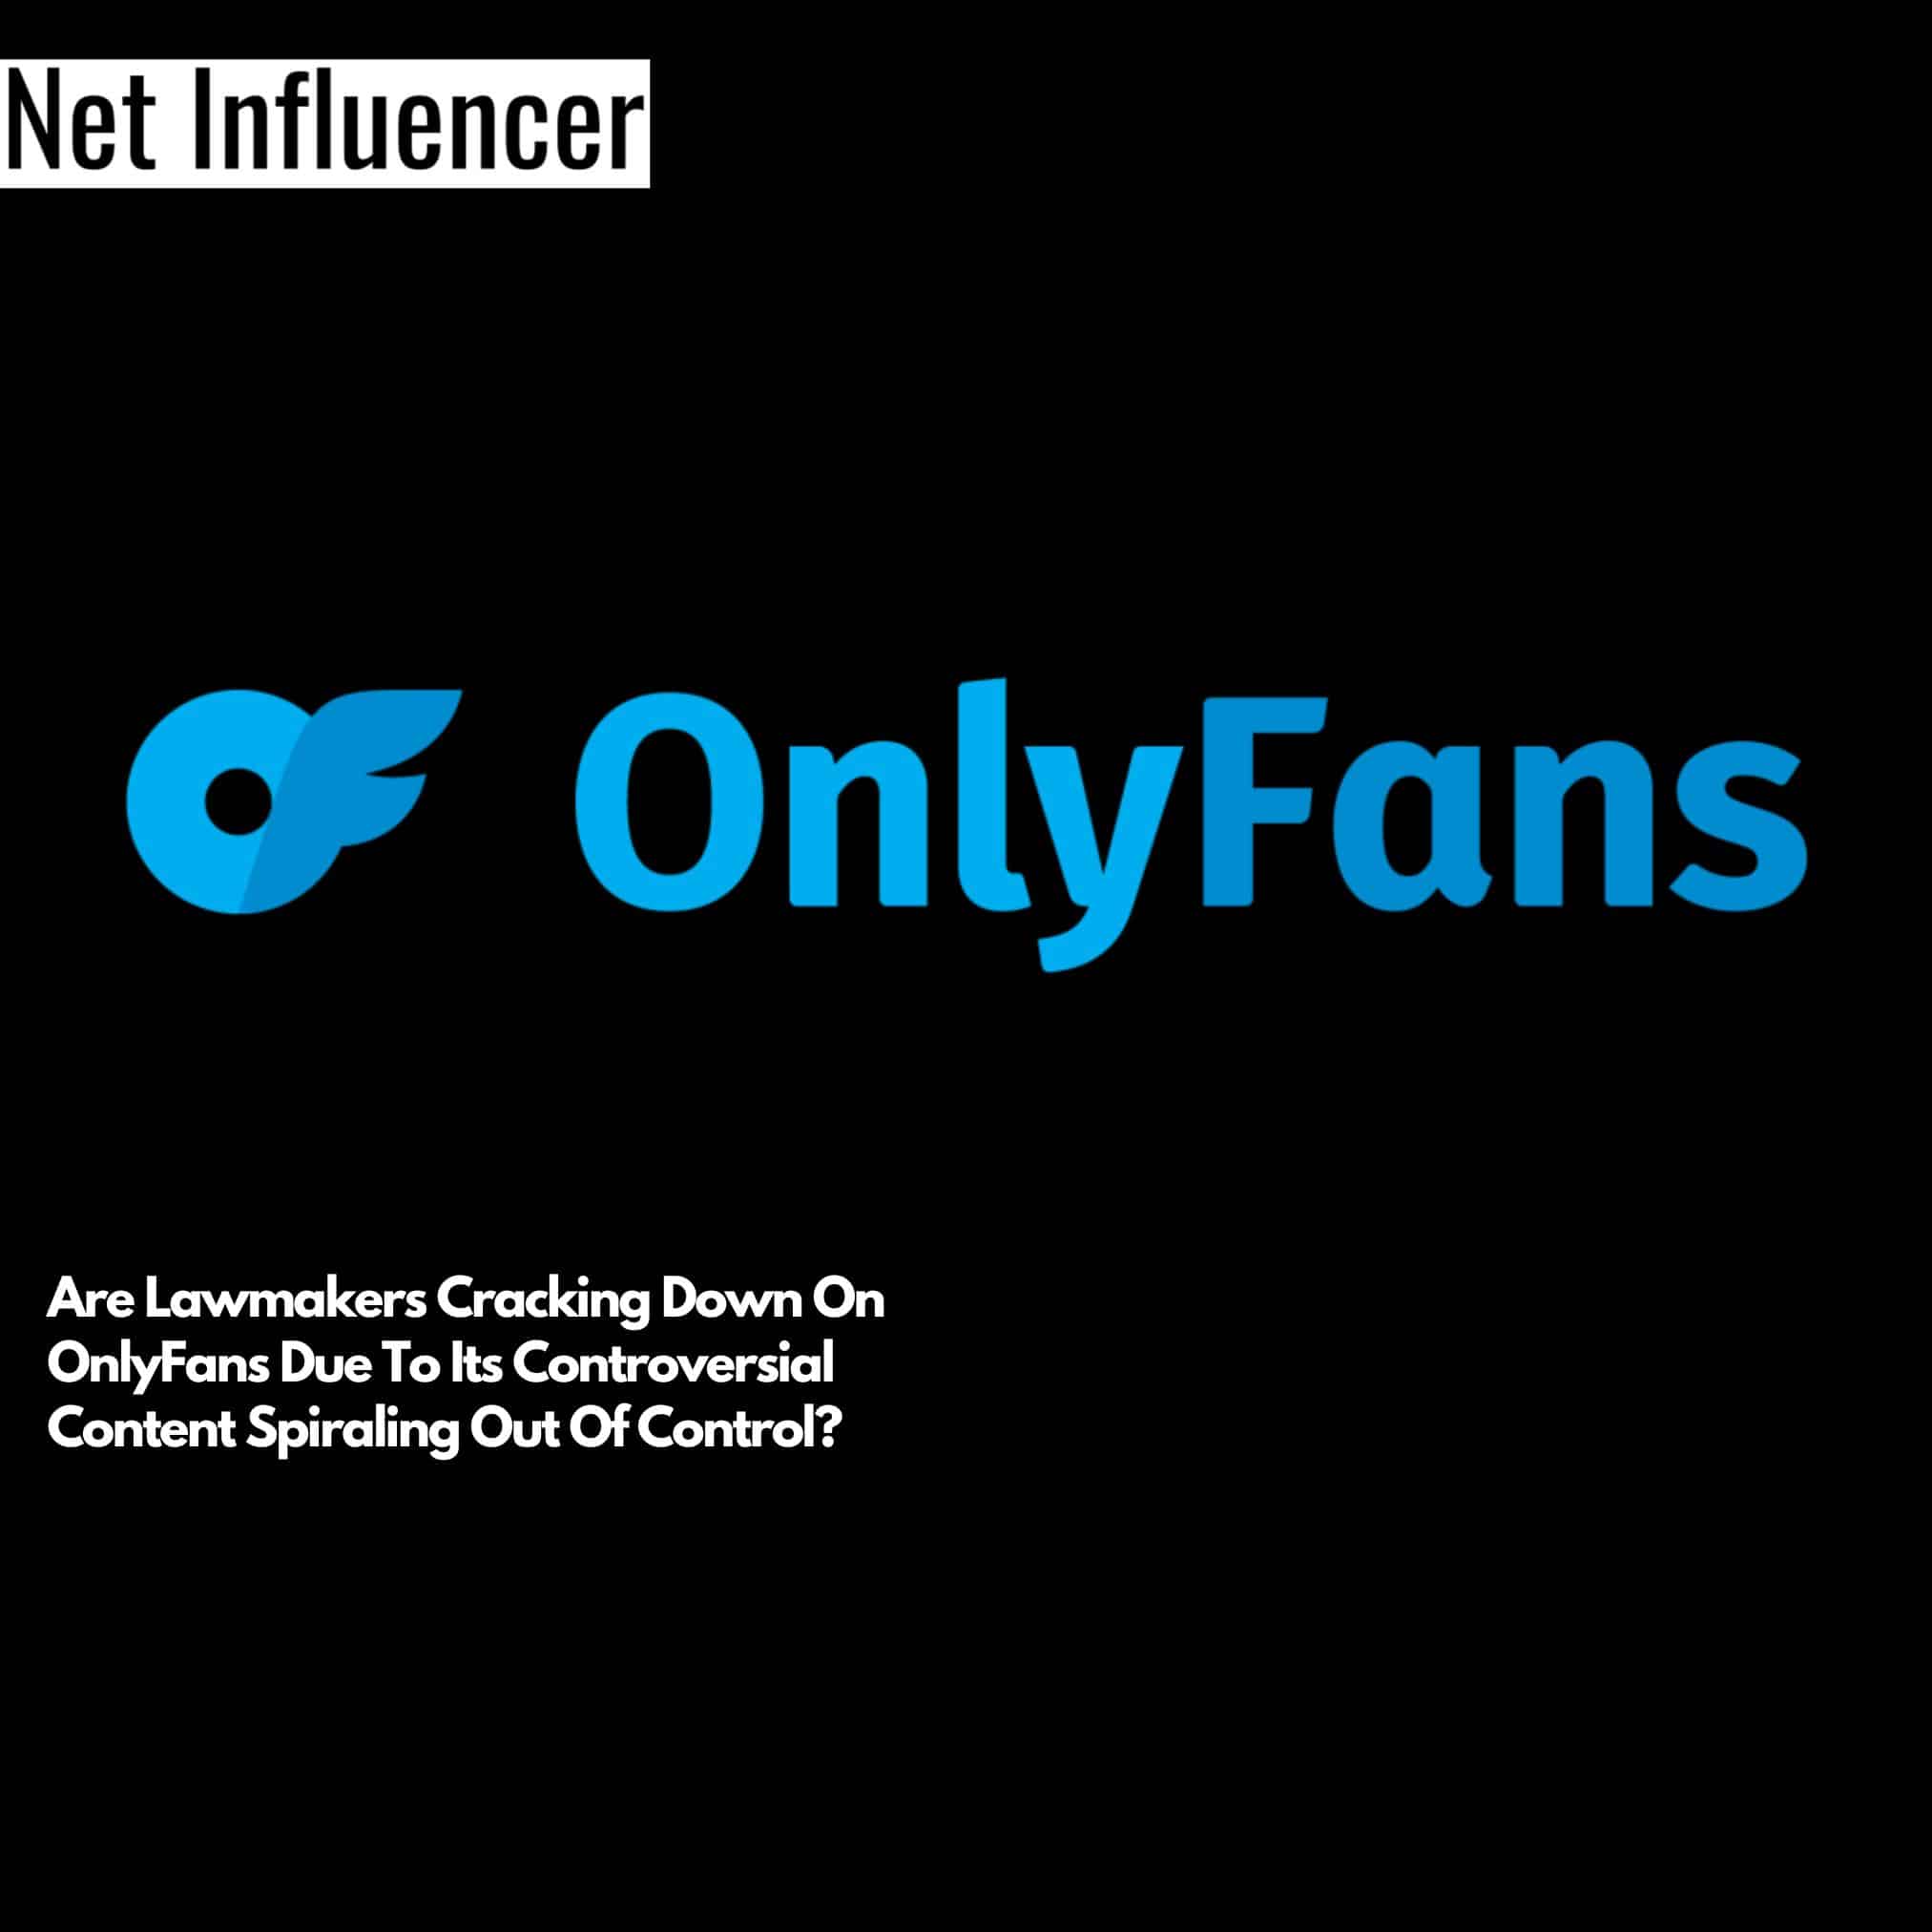 Are Lawmakers Cracking Down On OnlyFans Due To Its Controversial Content Spiraling Out Of Control